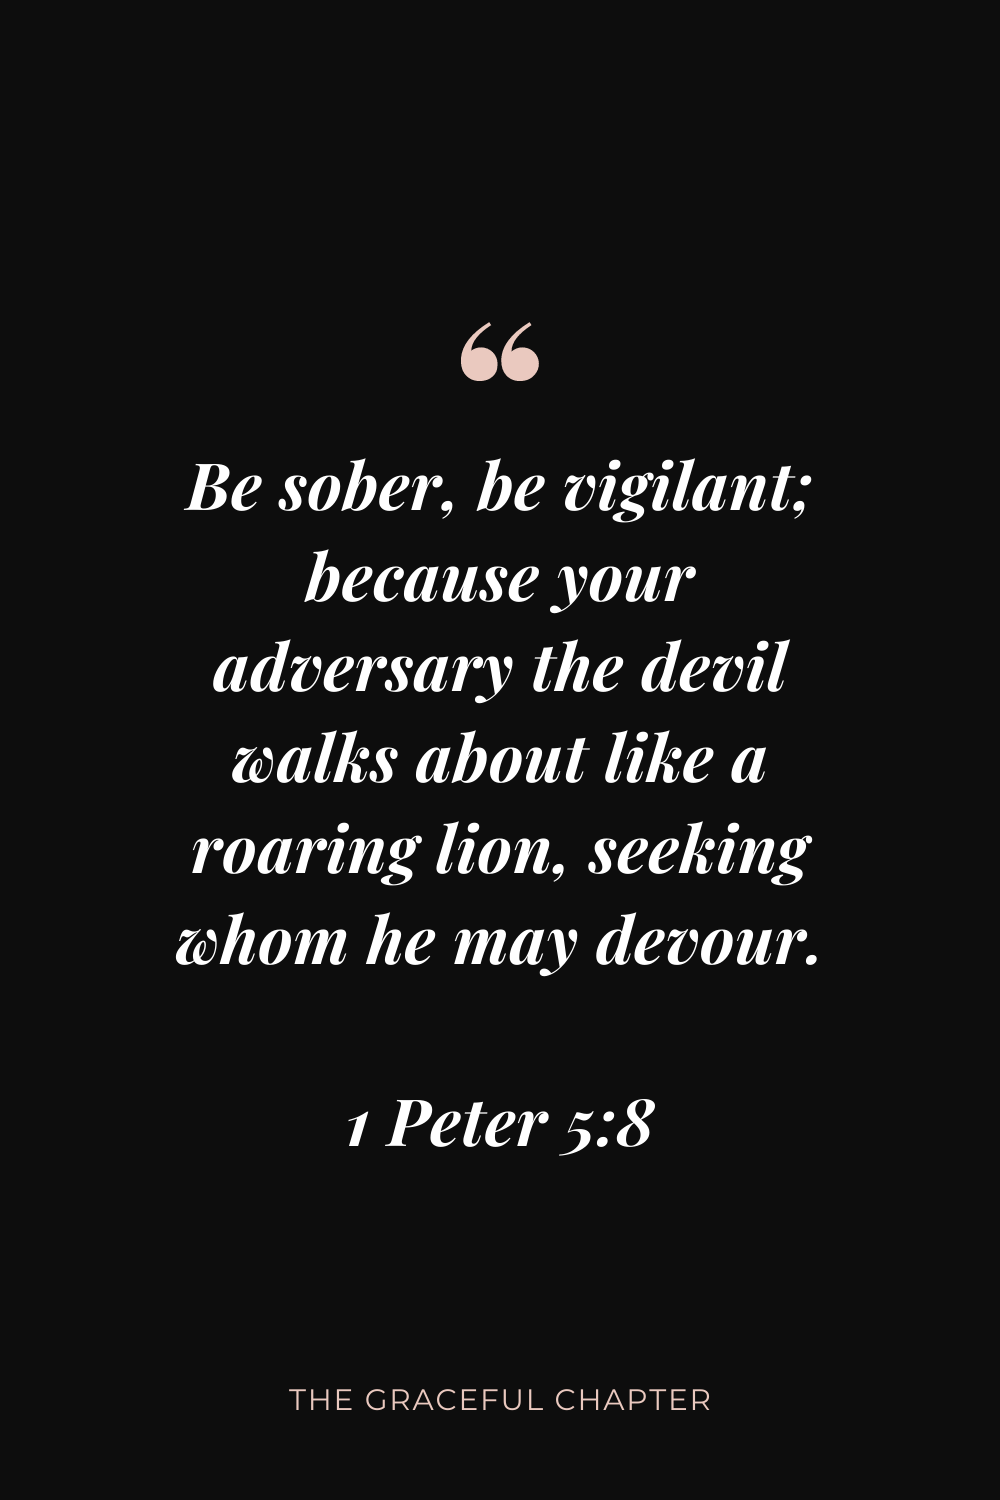 Be sober, be vigilant; because your adversary the devil walks about like a roaring lion, seeking whom he may devour. 1 Peter 5:8